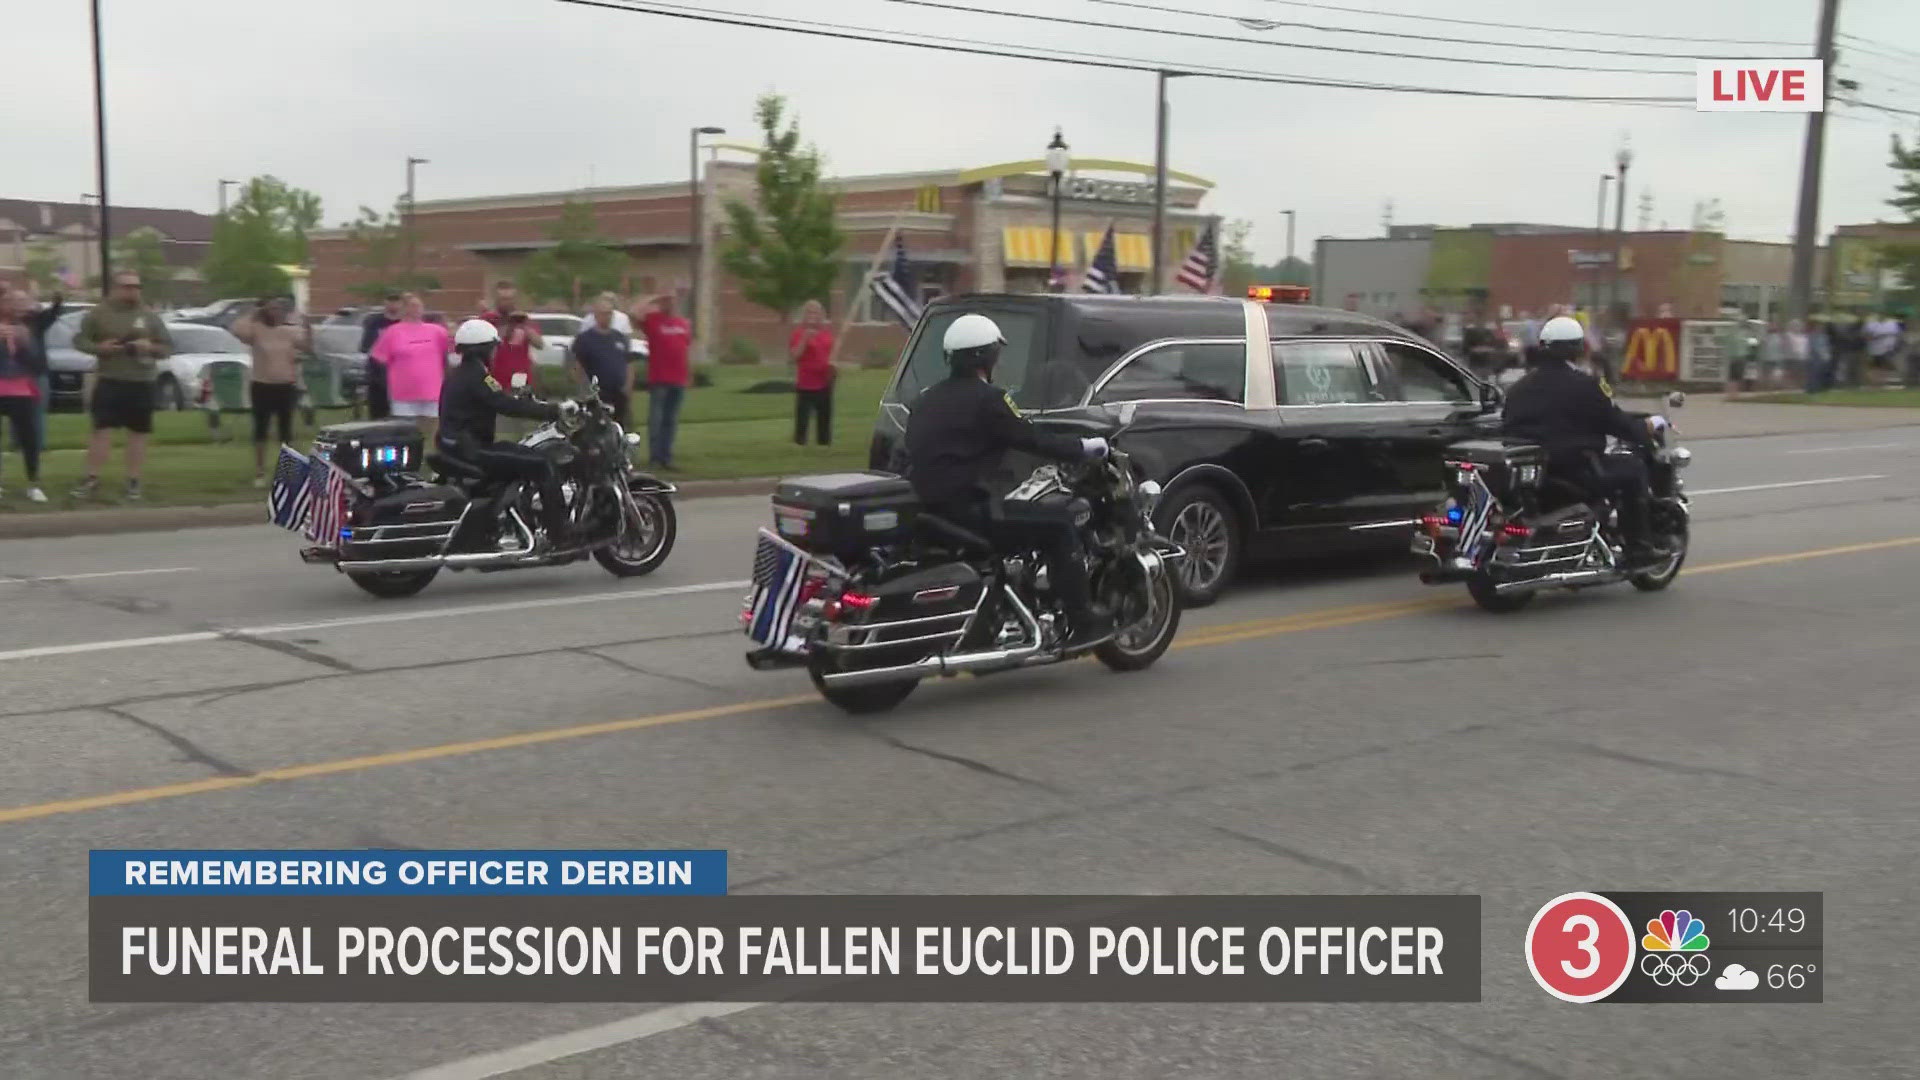 The procession to the funeral of slain Euclid police officer Jacob Derbin began Saturday morning from A. Ripepi & Sons Funeral Home in Middleburg Heights.